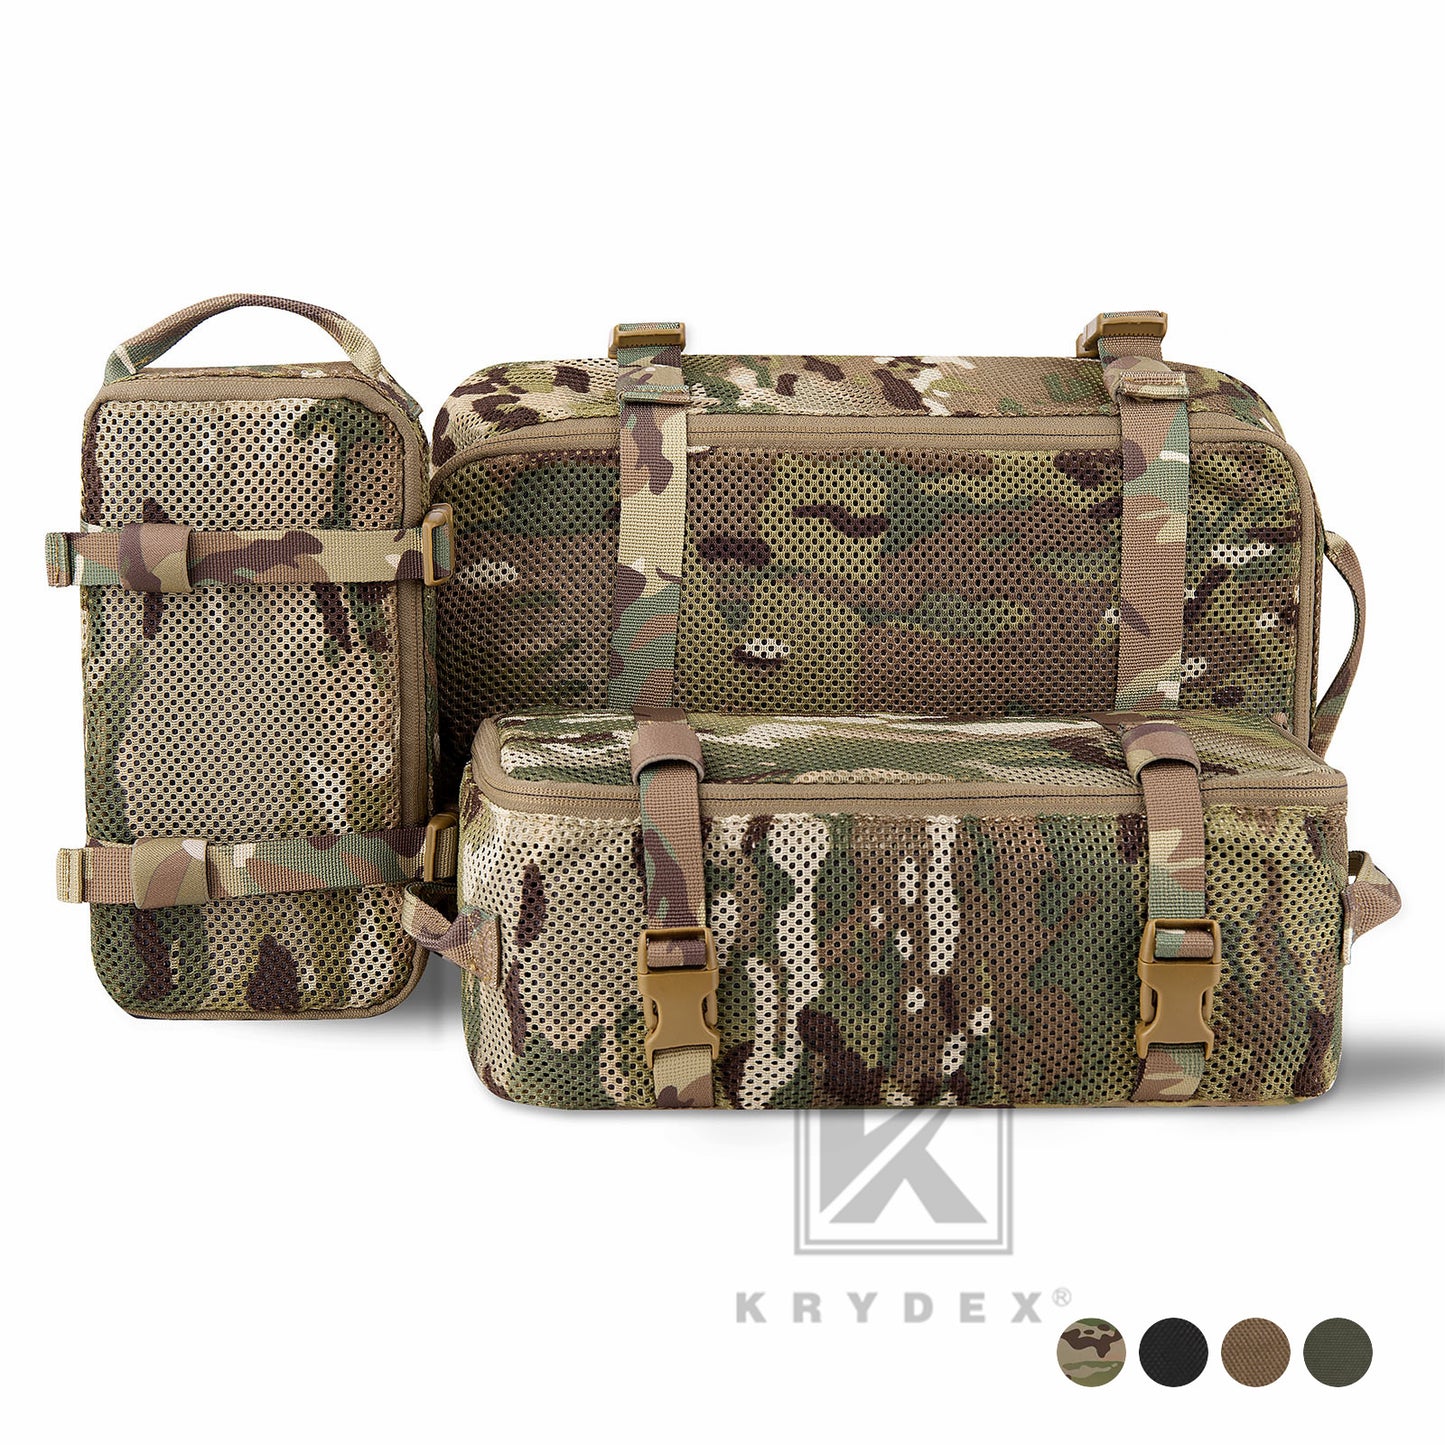 KRYDEX Tactical Modular Pouch Set Outdoor Backpack Organizer Travel Suitcase Packing Cubes